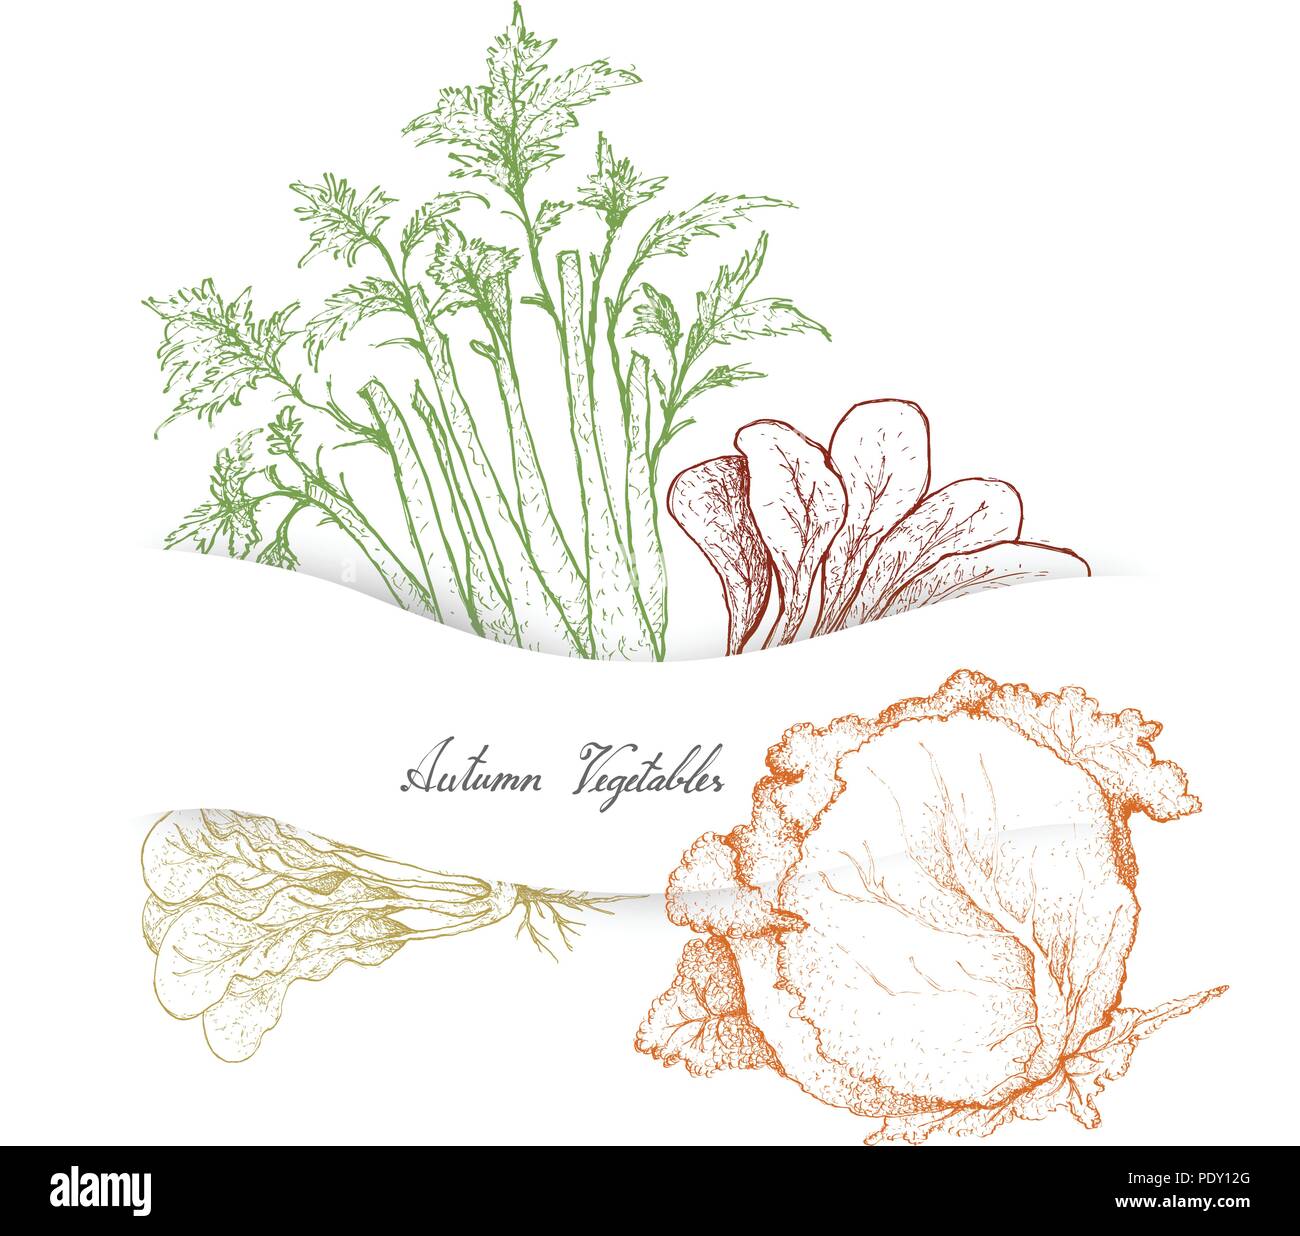 Autumn Vegetables, Illustration of Hand Drawn Sketch Delicious Fresh Green Apium Graveolens or Celery with Cabbages. Stock Vector